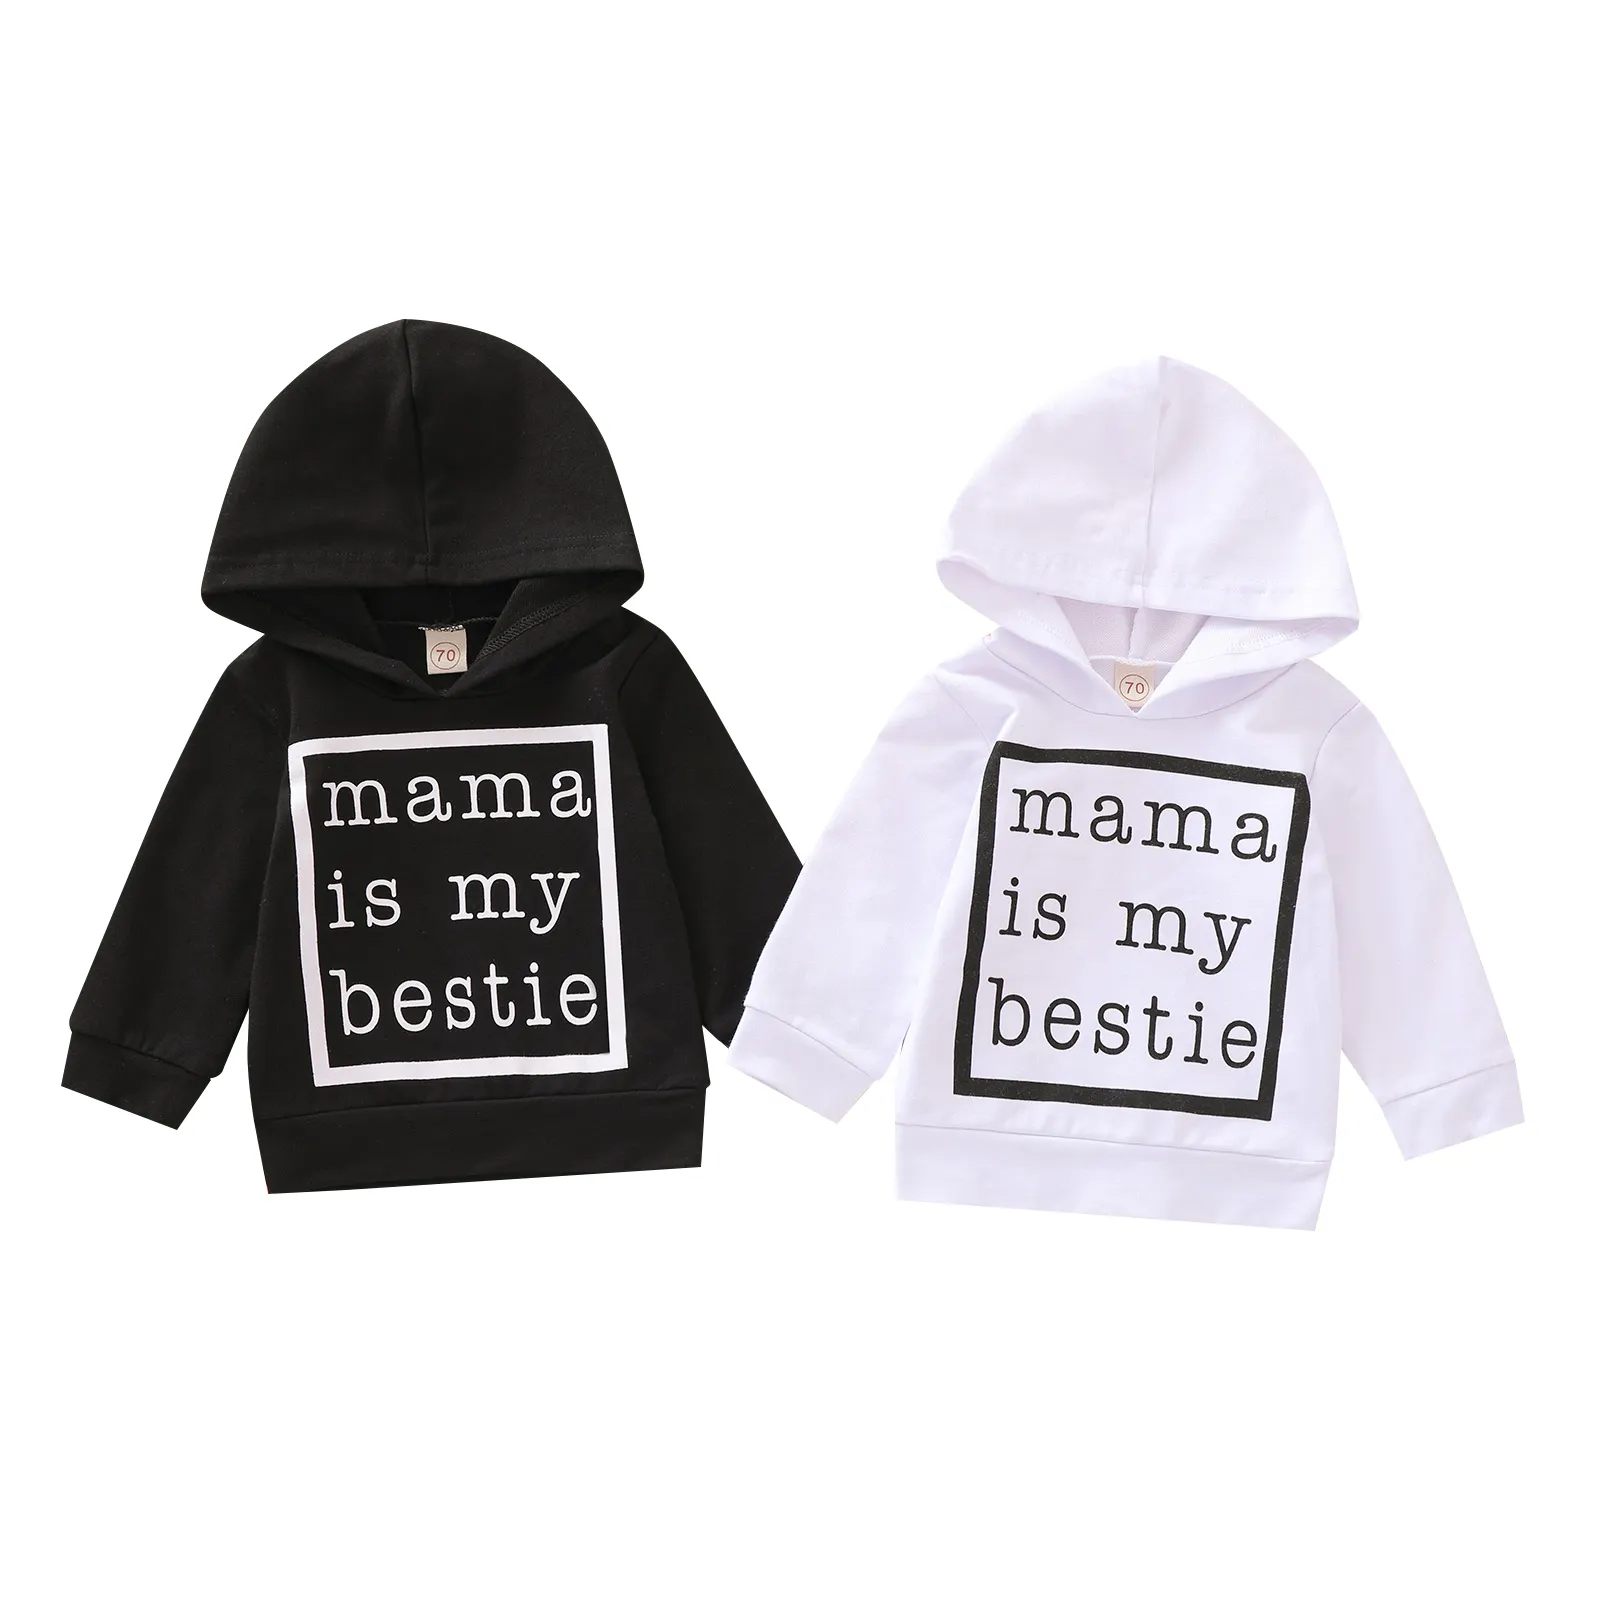 Sunny Baby 0-6 Years Old Boys and Girls Hoodies and Sweatshirts Black and White Hoodies for Baby